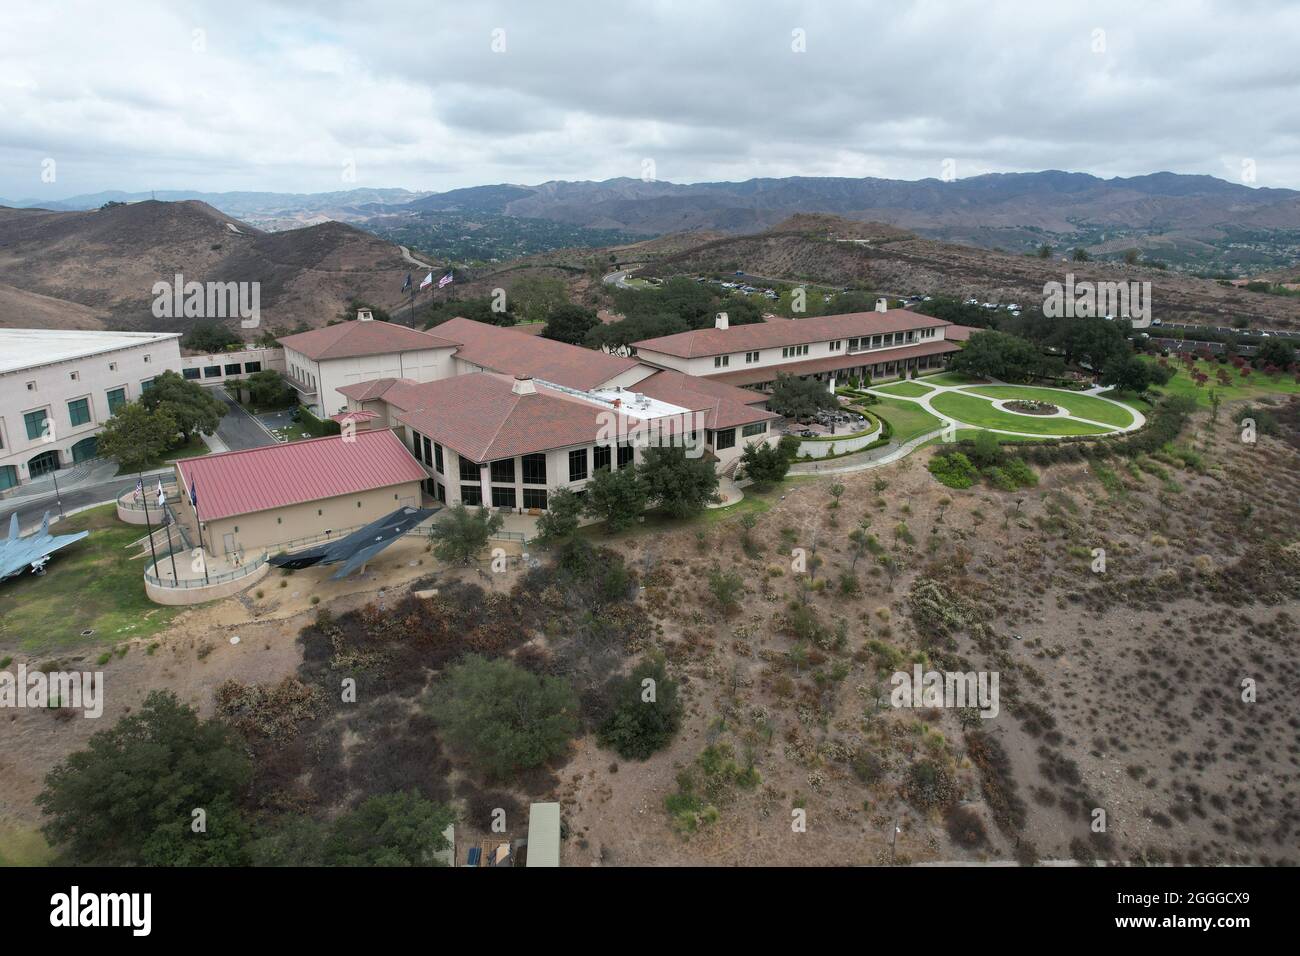 An aerial view of the Ronald Reagan Presidential Library, Wednesday, Aug. 18, 2021, in Simi Valley, Caif. Stock Photo